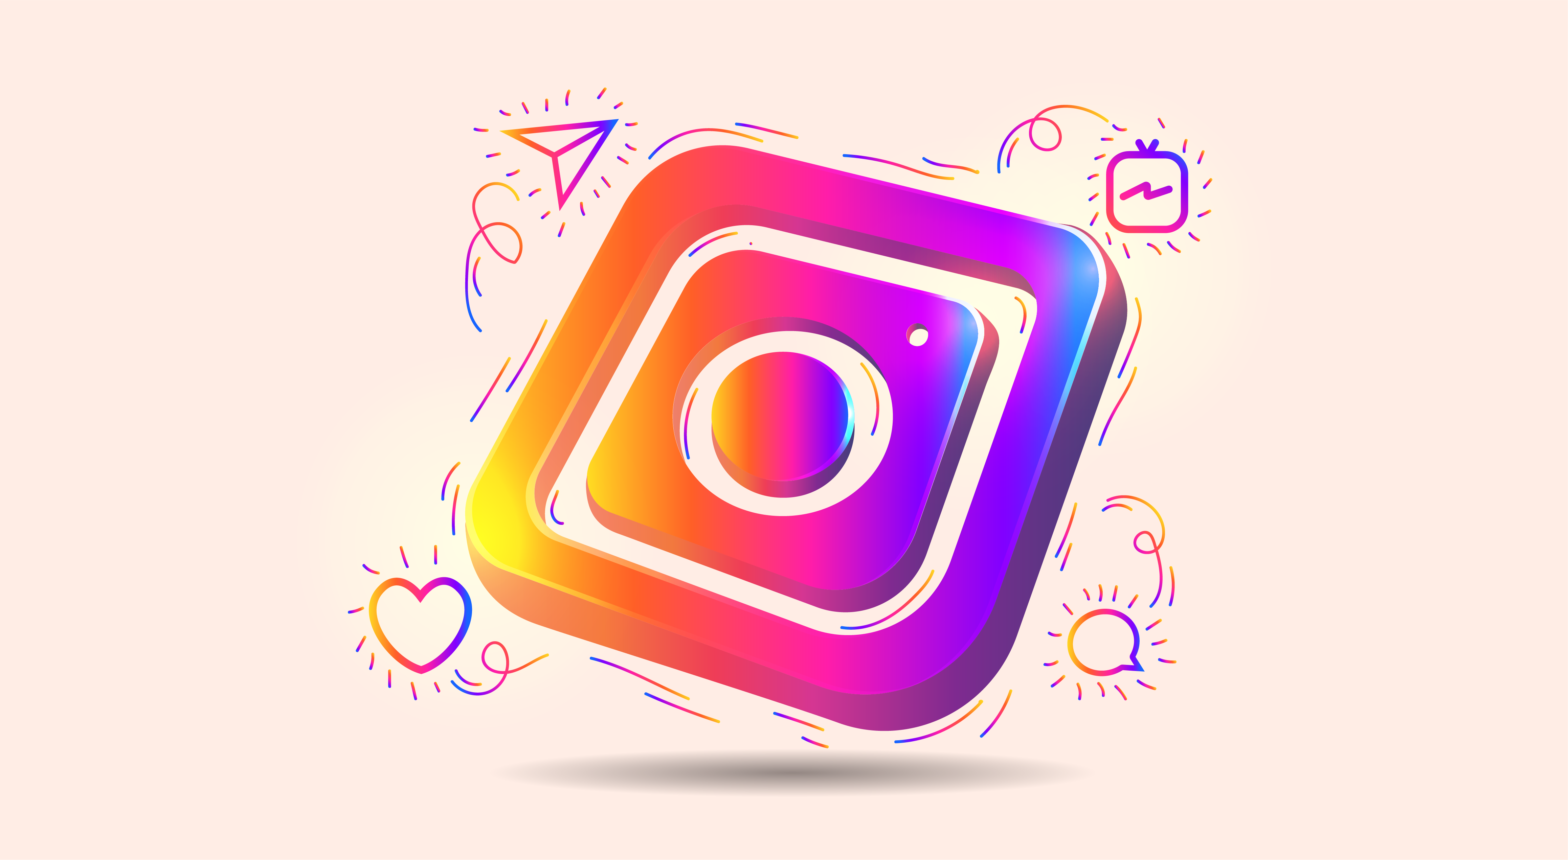 5 Top Types of Content That Work on Instagram